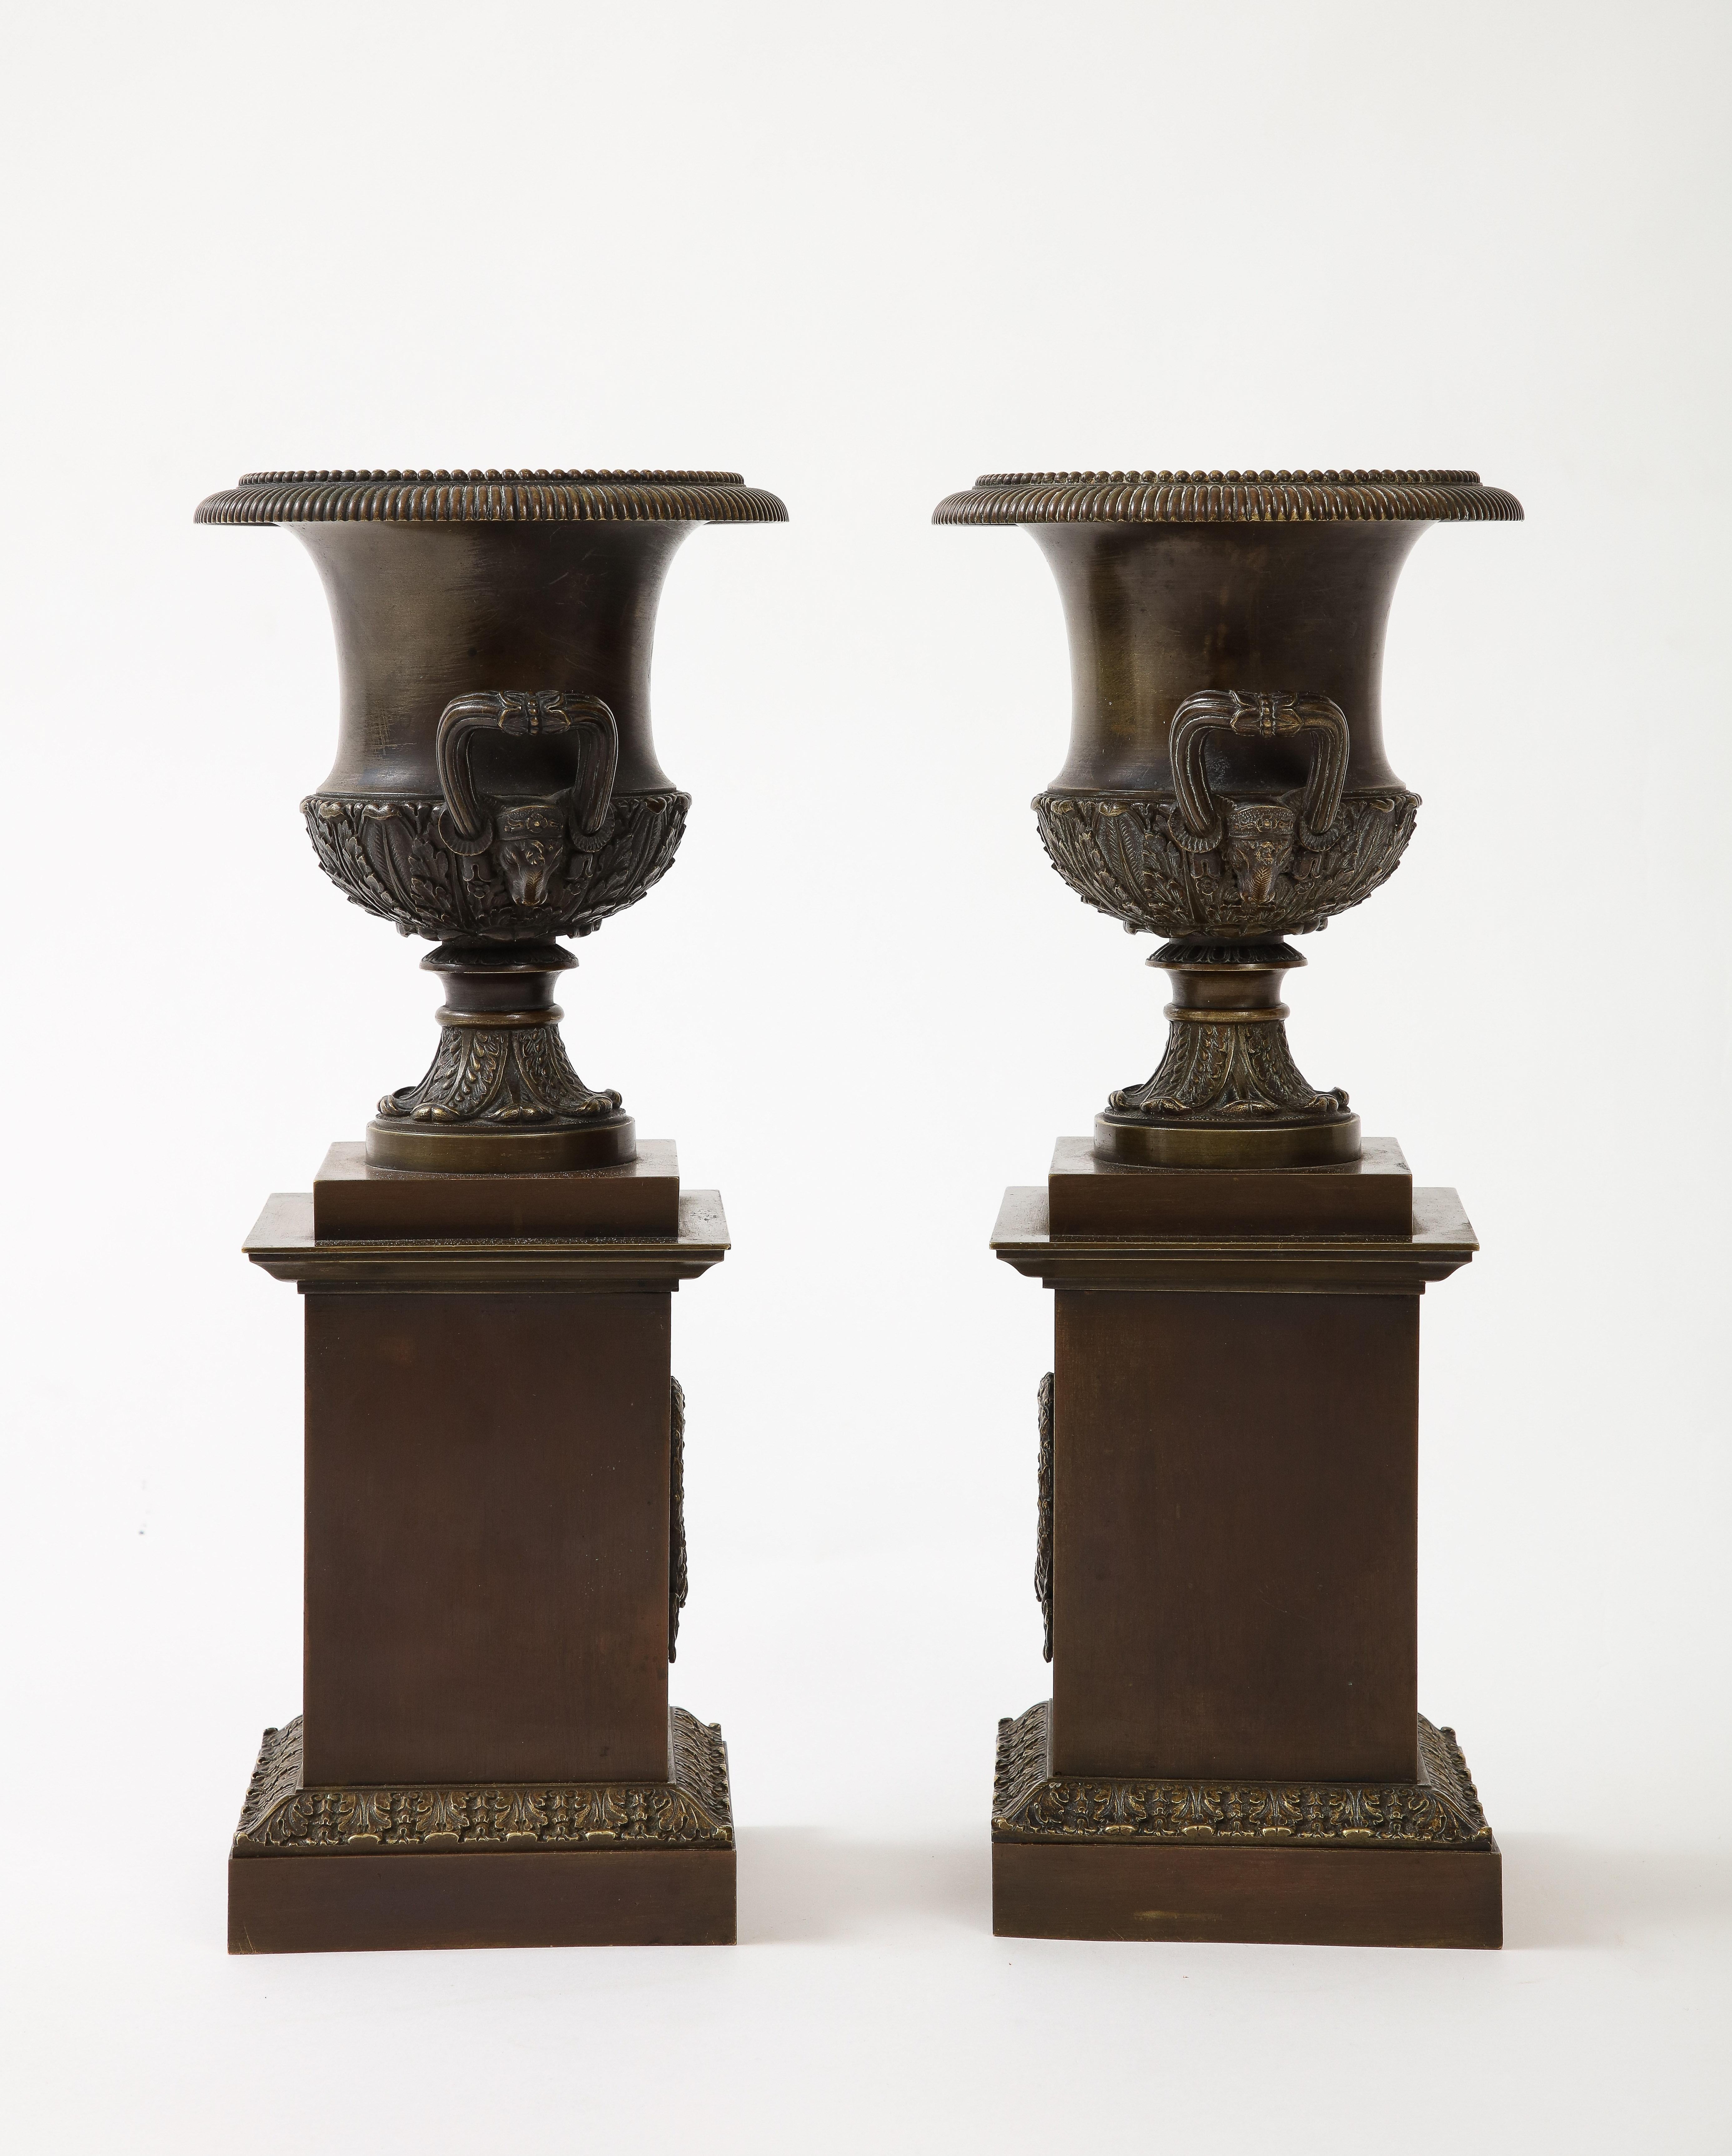 Pair of Patinated Bronze Empire Period Medici Urns For Sale 2